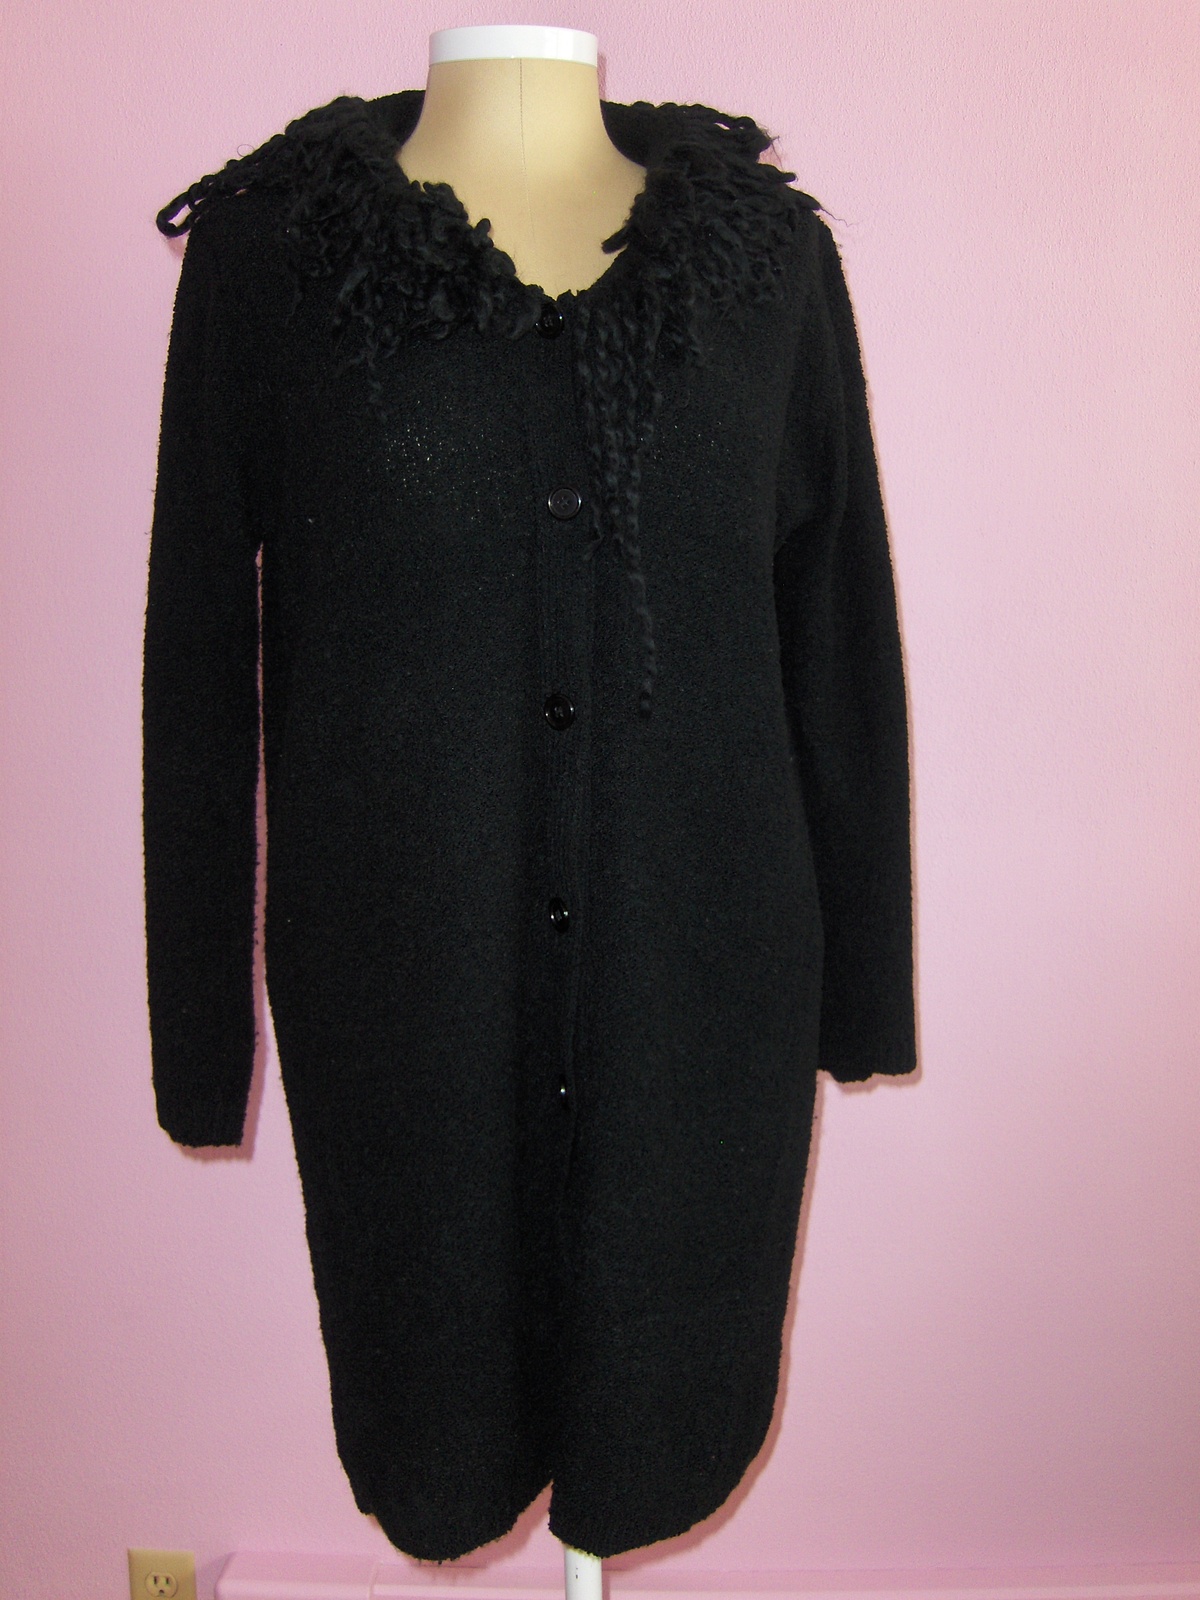 Primary image for Womens Black Cardigan Sweater Coat Black L to XL with Fringe on Collar Area